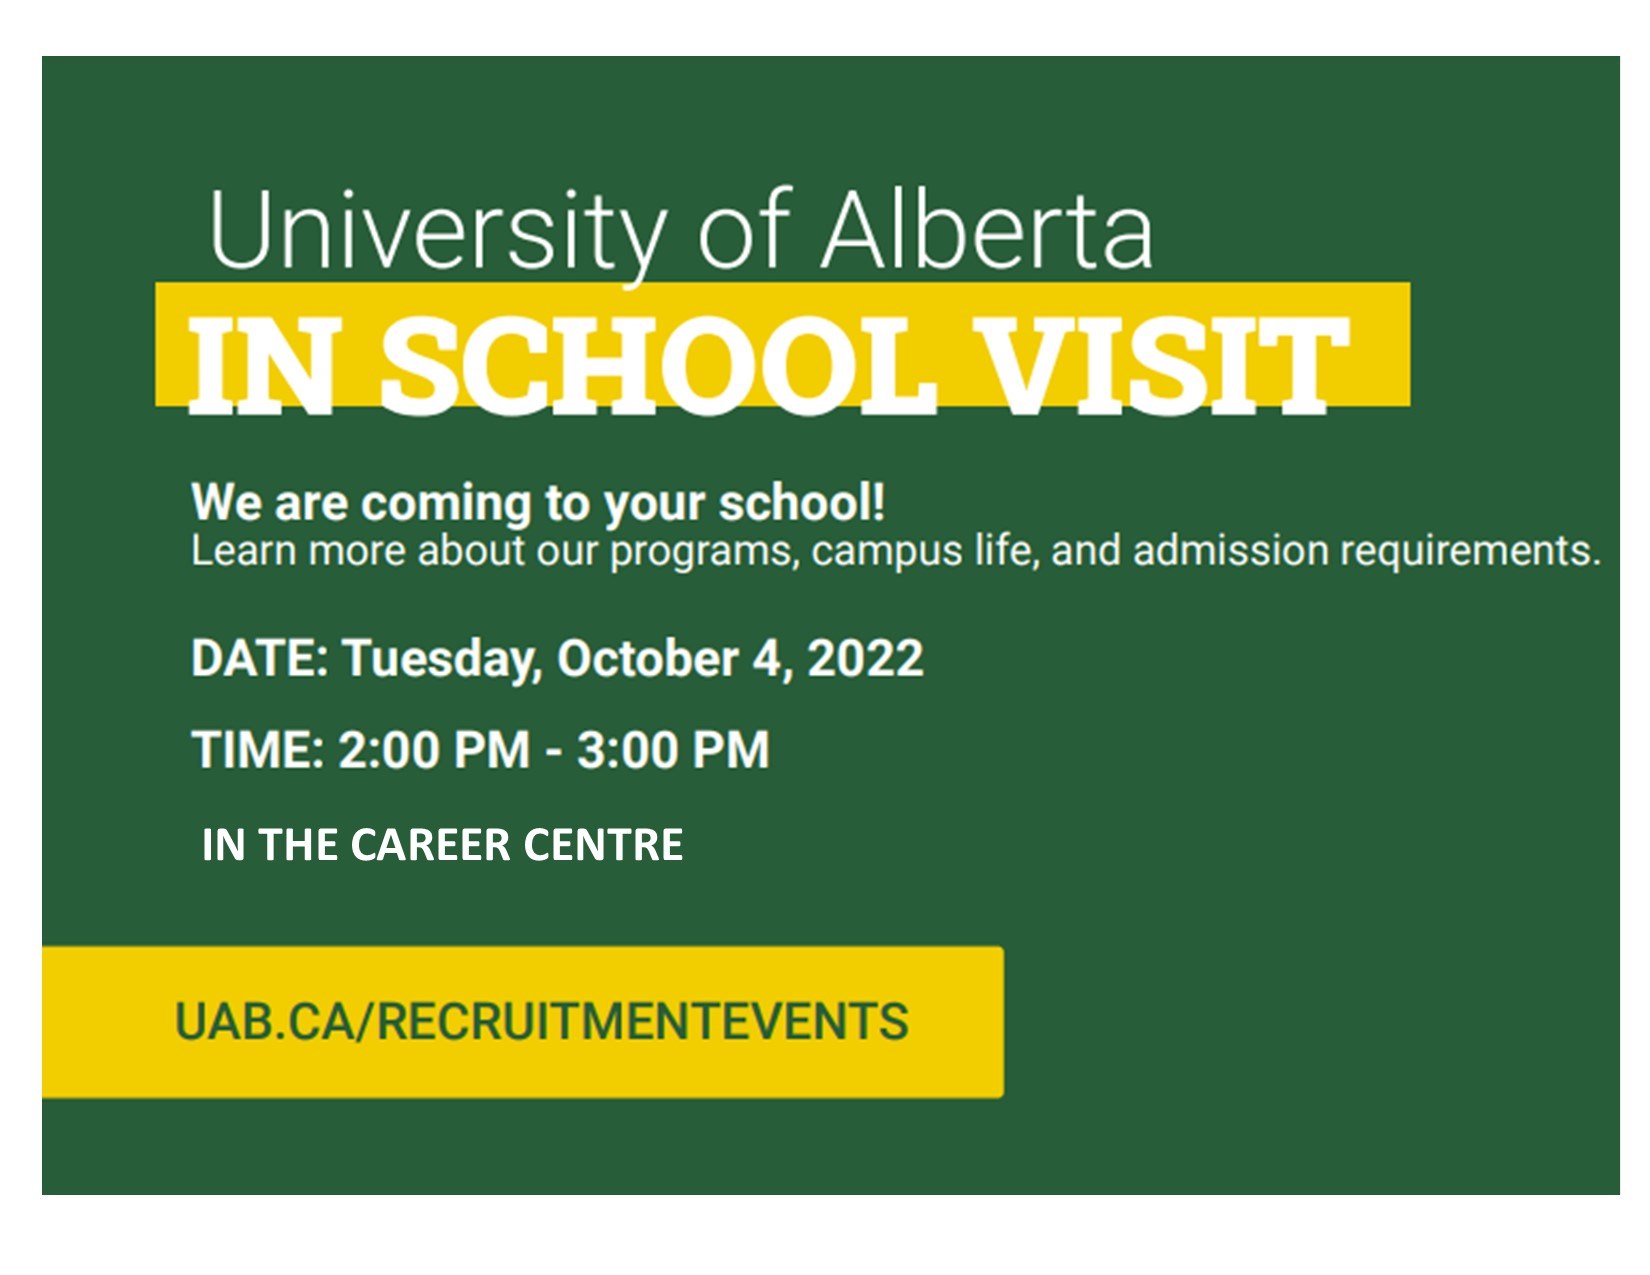 SEE WHAT THE UNIVERISTY OF ALBERTA HAS TO OFFER!